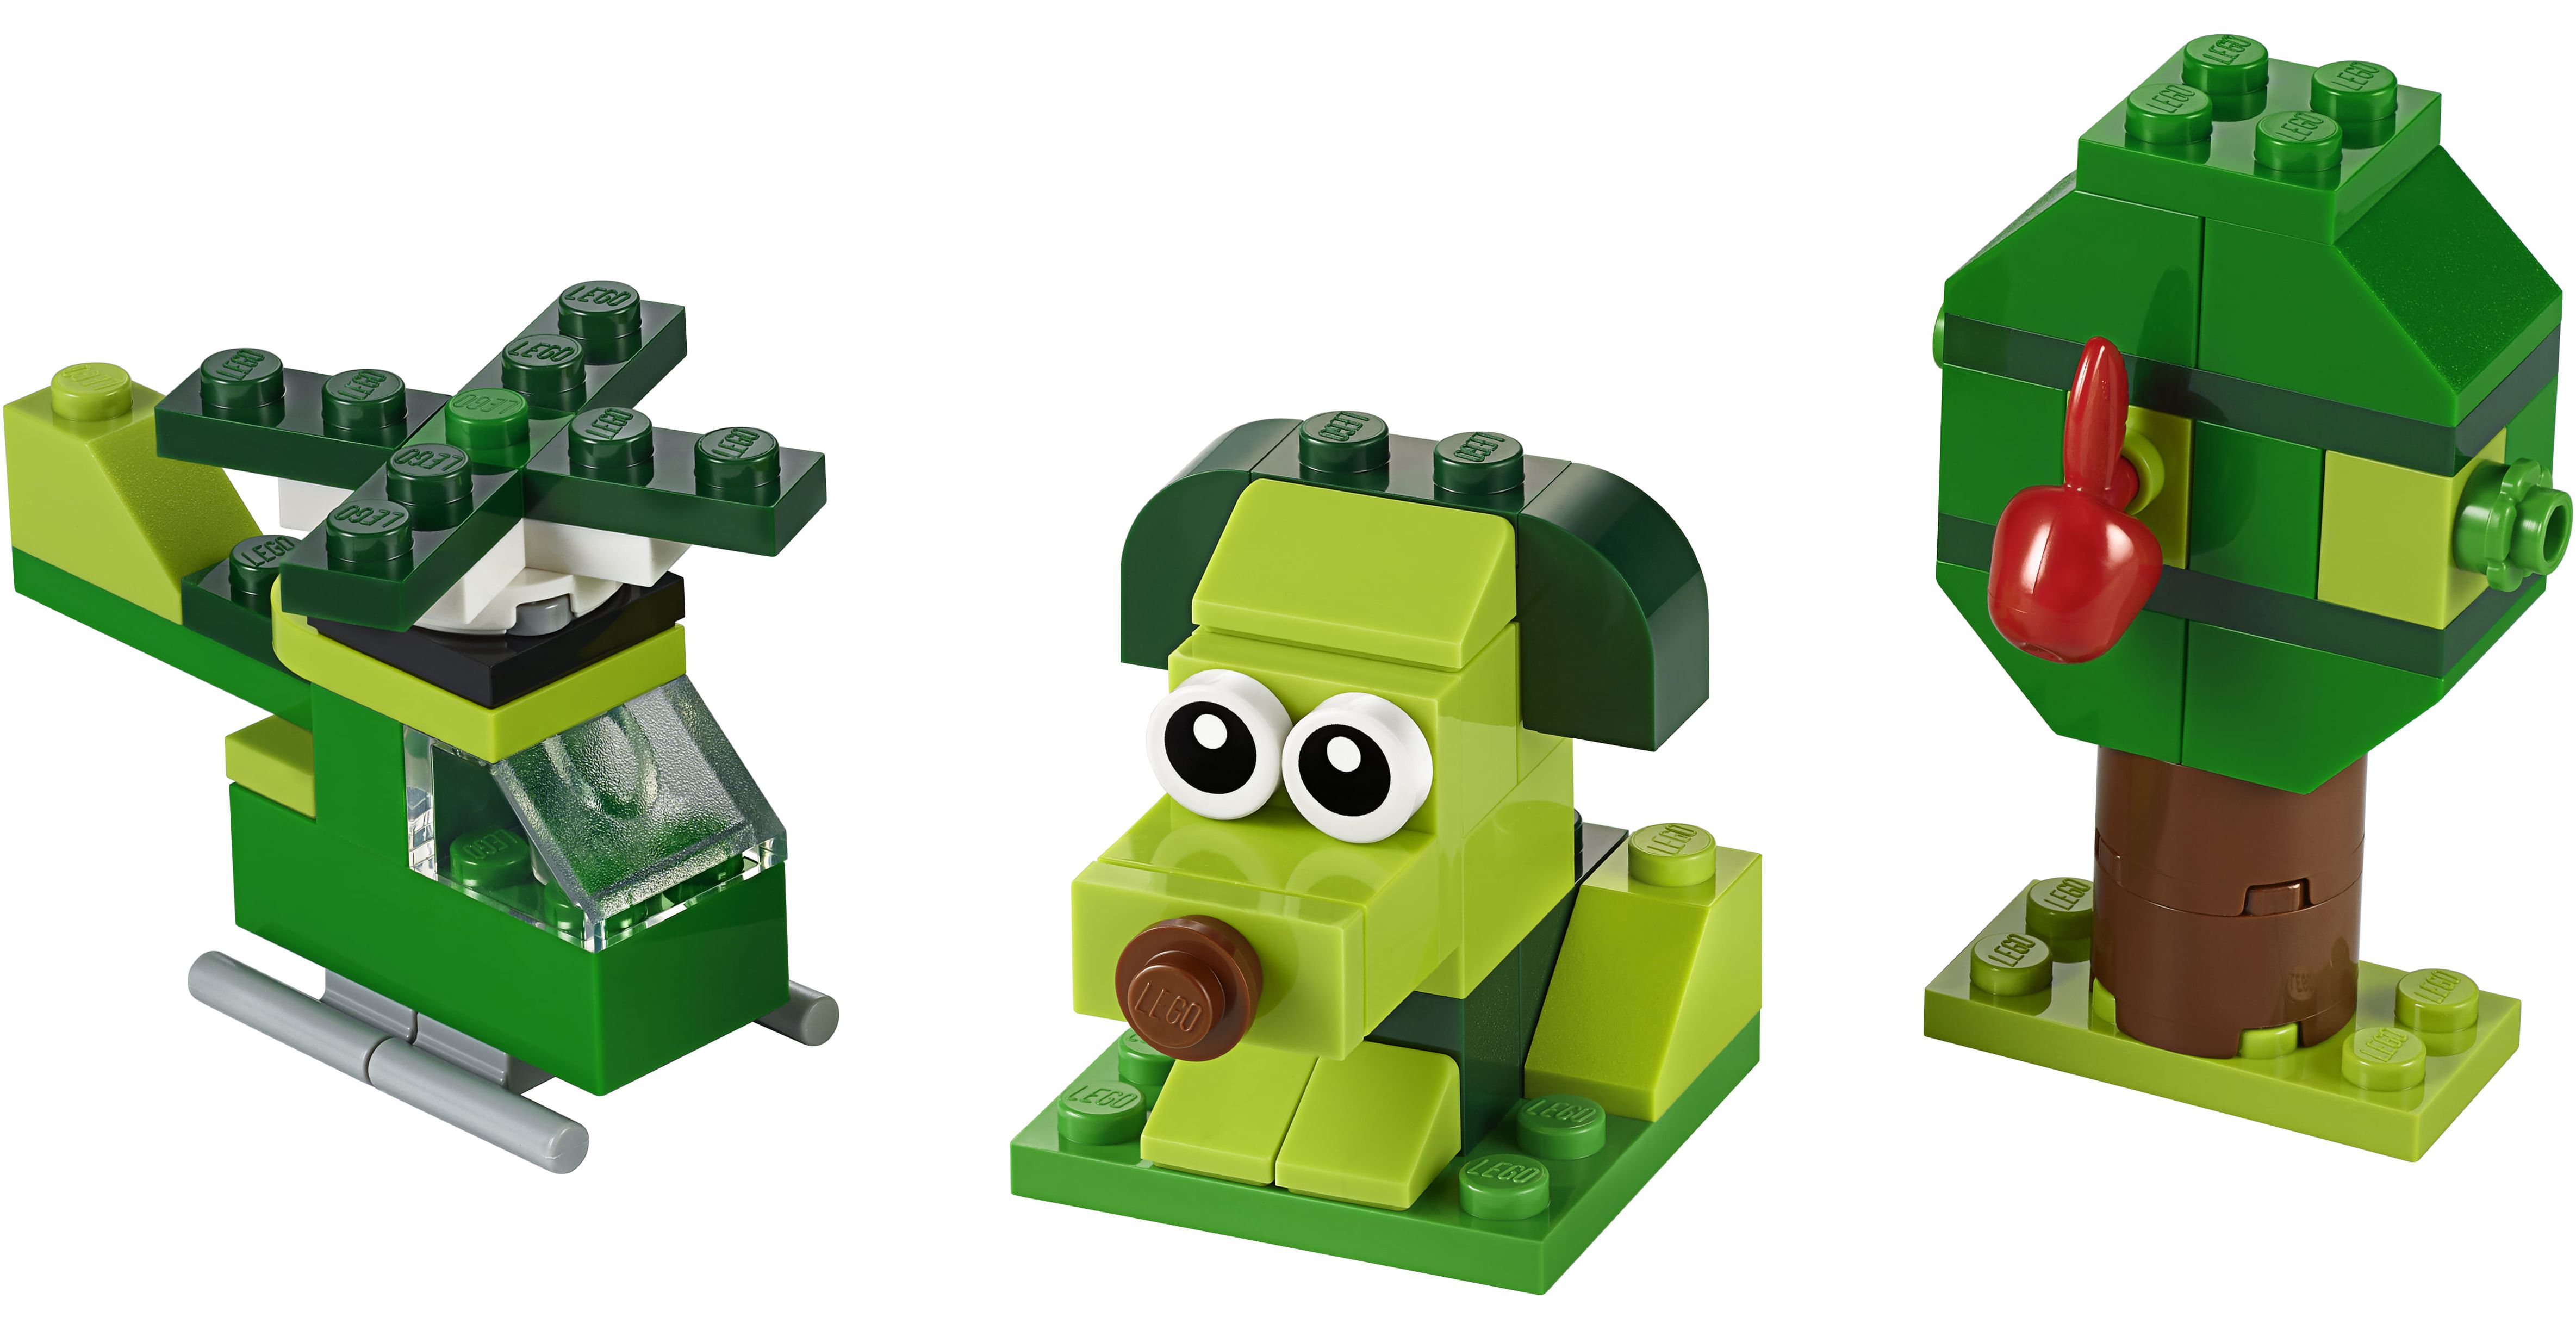 LEGO Classic Creative Green Bricks 11007 Building Kit to Inspire Imaginative Play (60 Pieces) - image 3 of 7